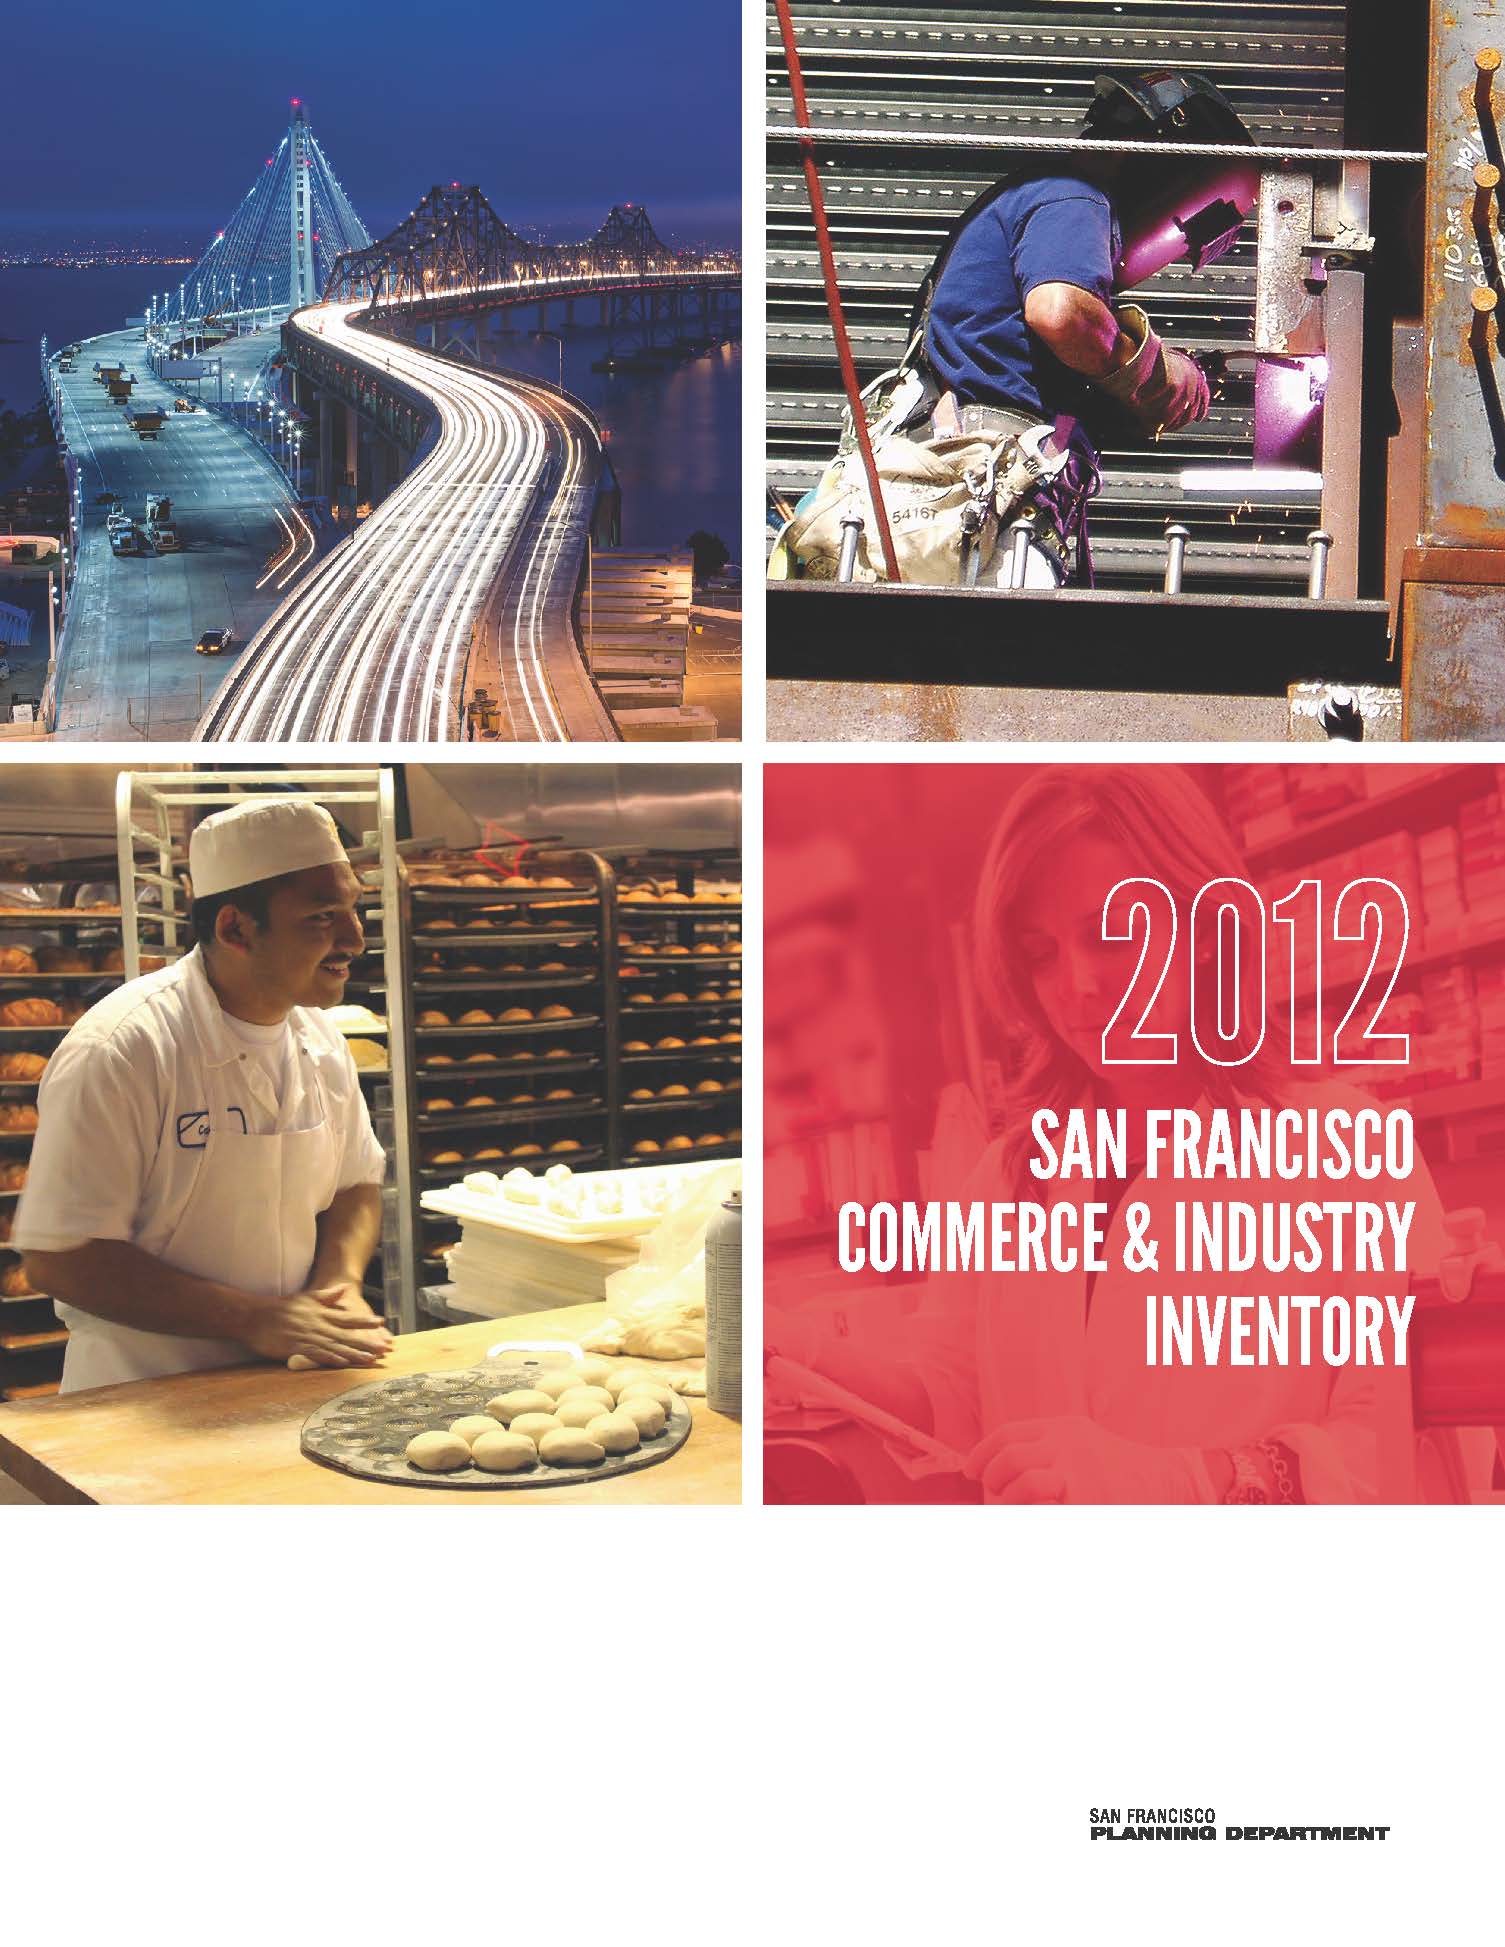 Cover Image for the 2012 Commerce & Industry Inventory Report